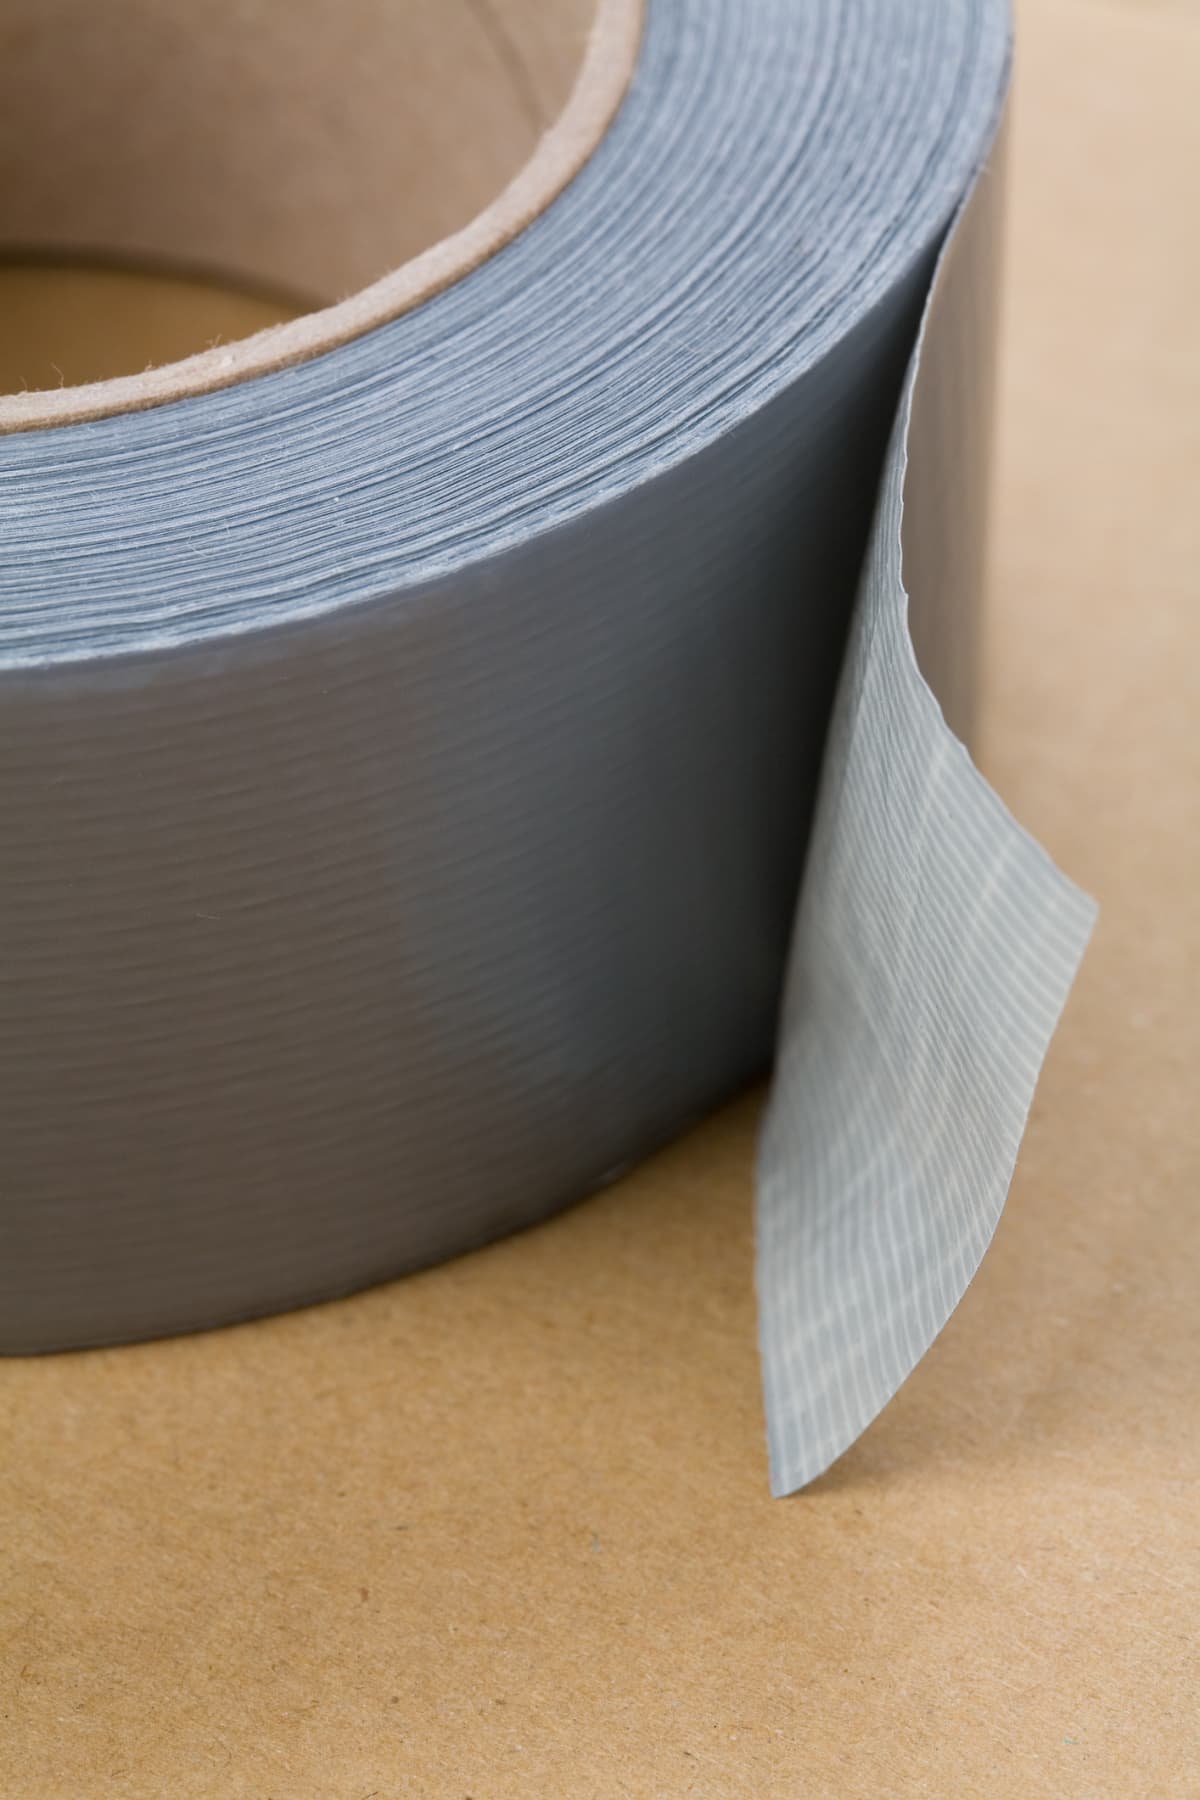 Close-up of gray duct tape